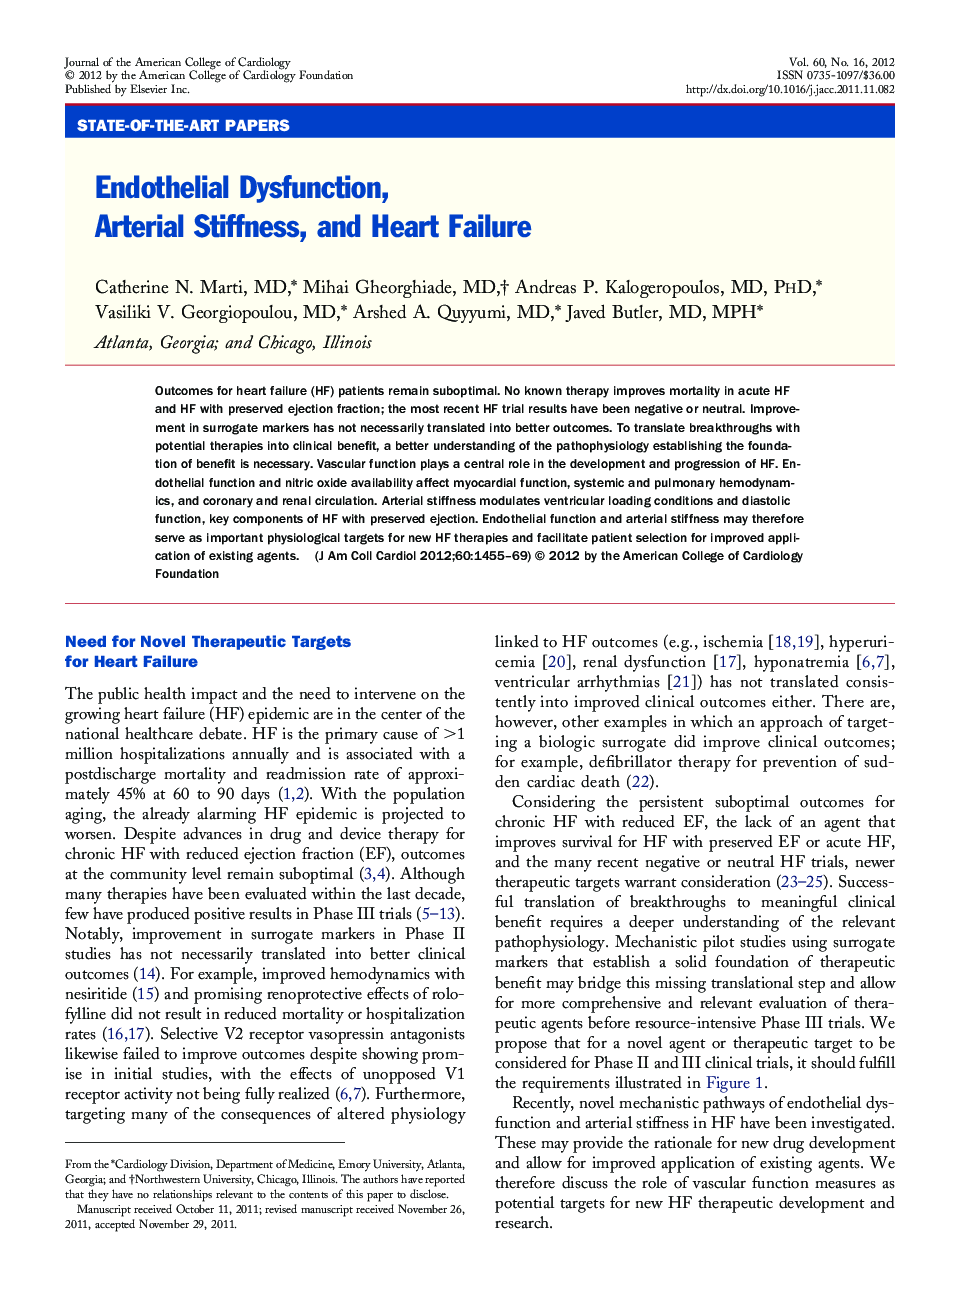 Endothelial Dysfunction, Arterial Stiffness, and Heart Failure 